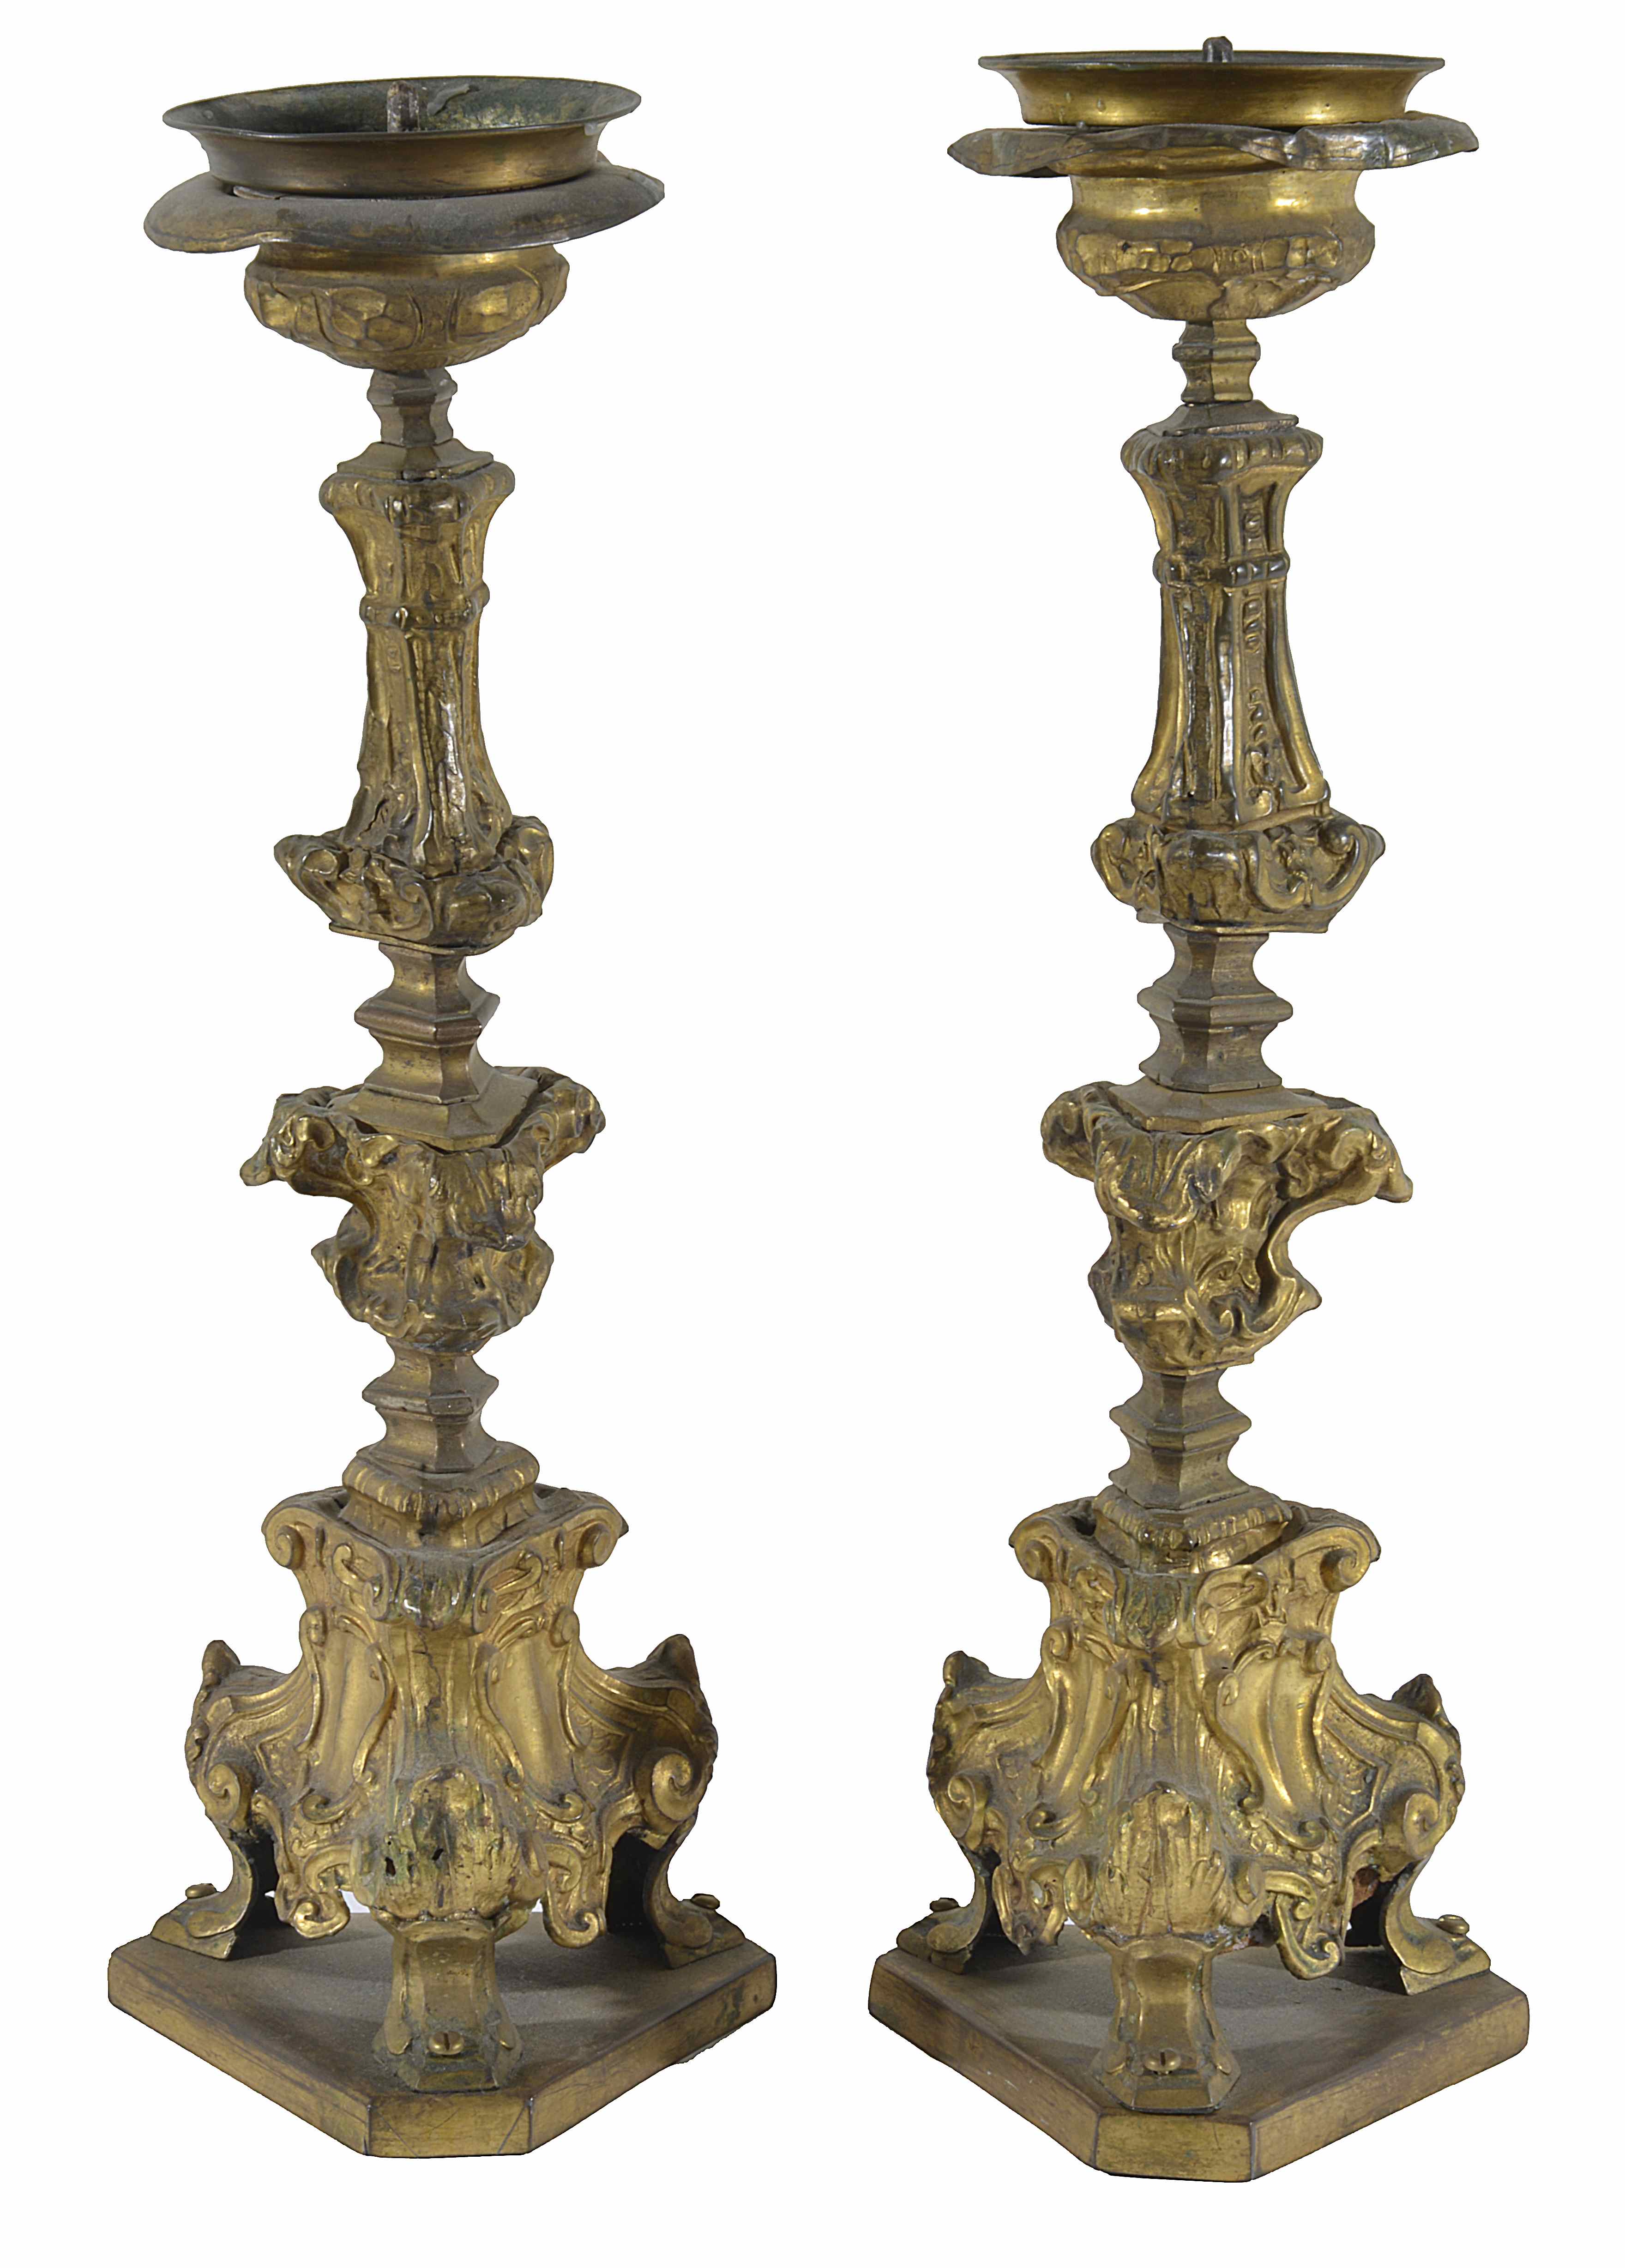 A pair of decorative gilt brass repoussé candlesticks
possibly 18th centuryDimensions: height